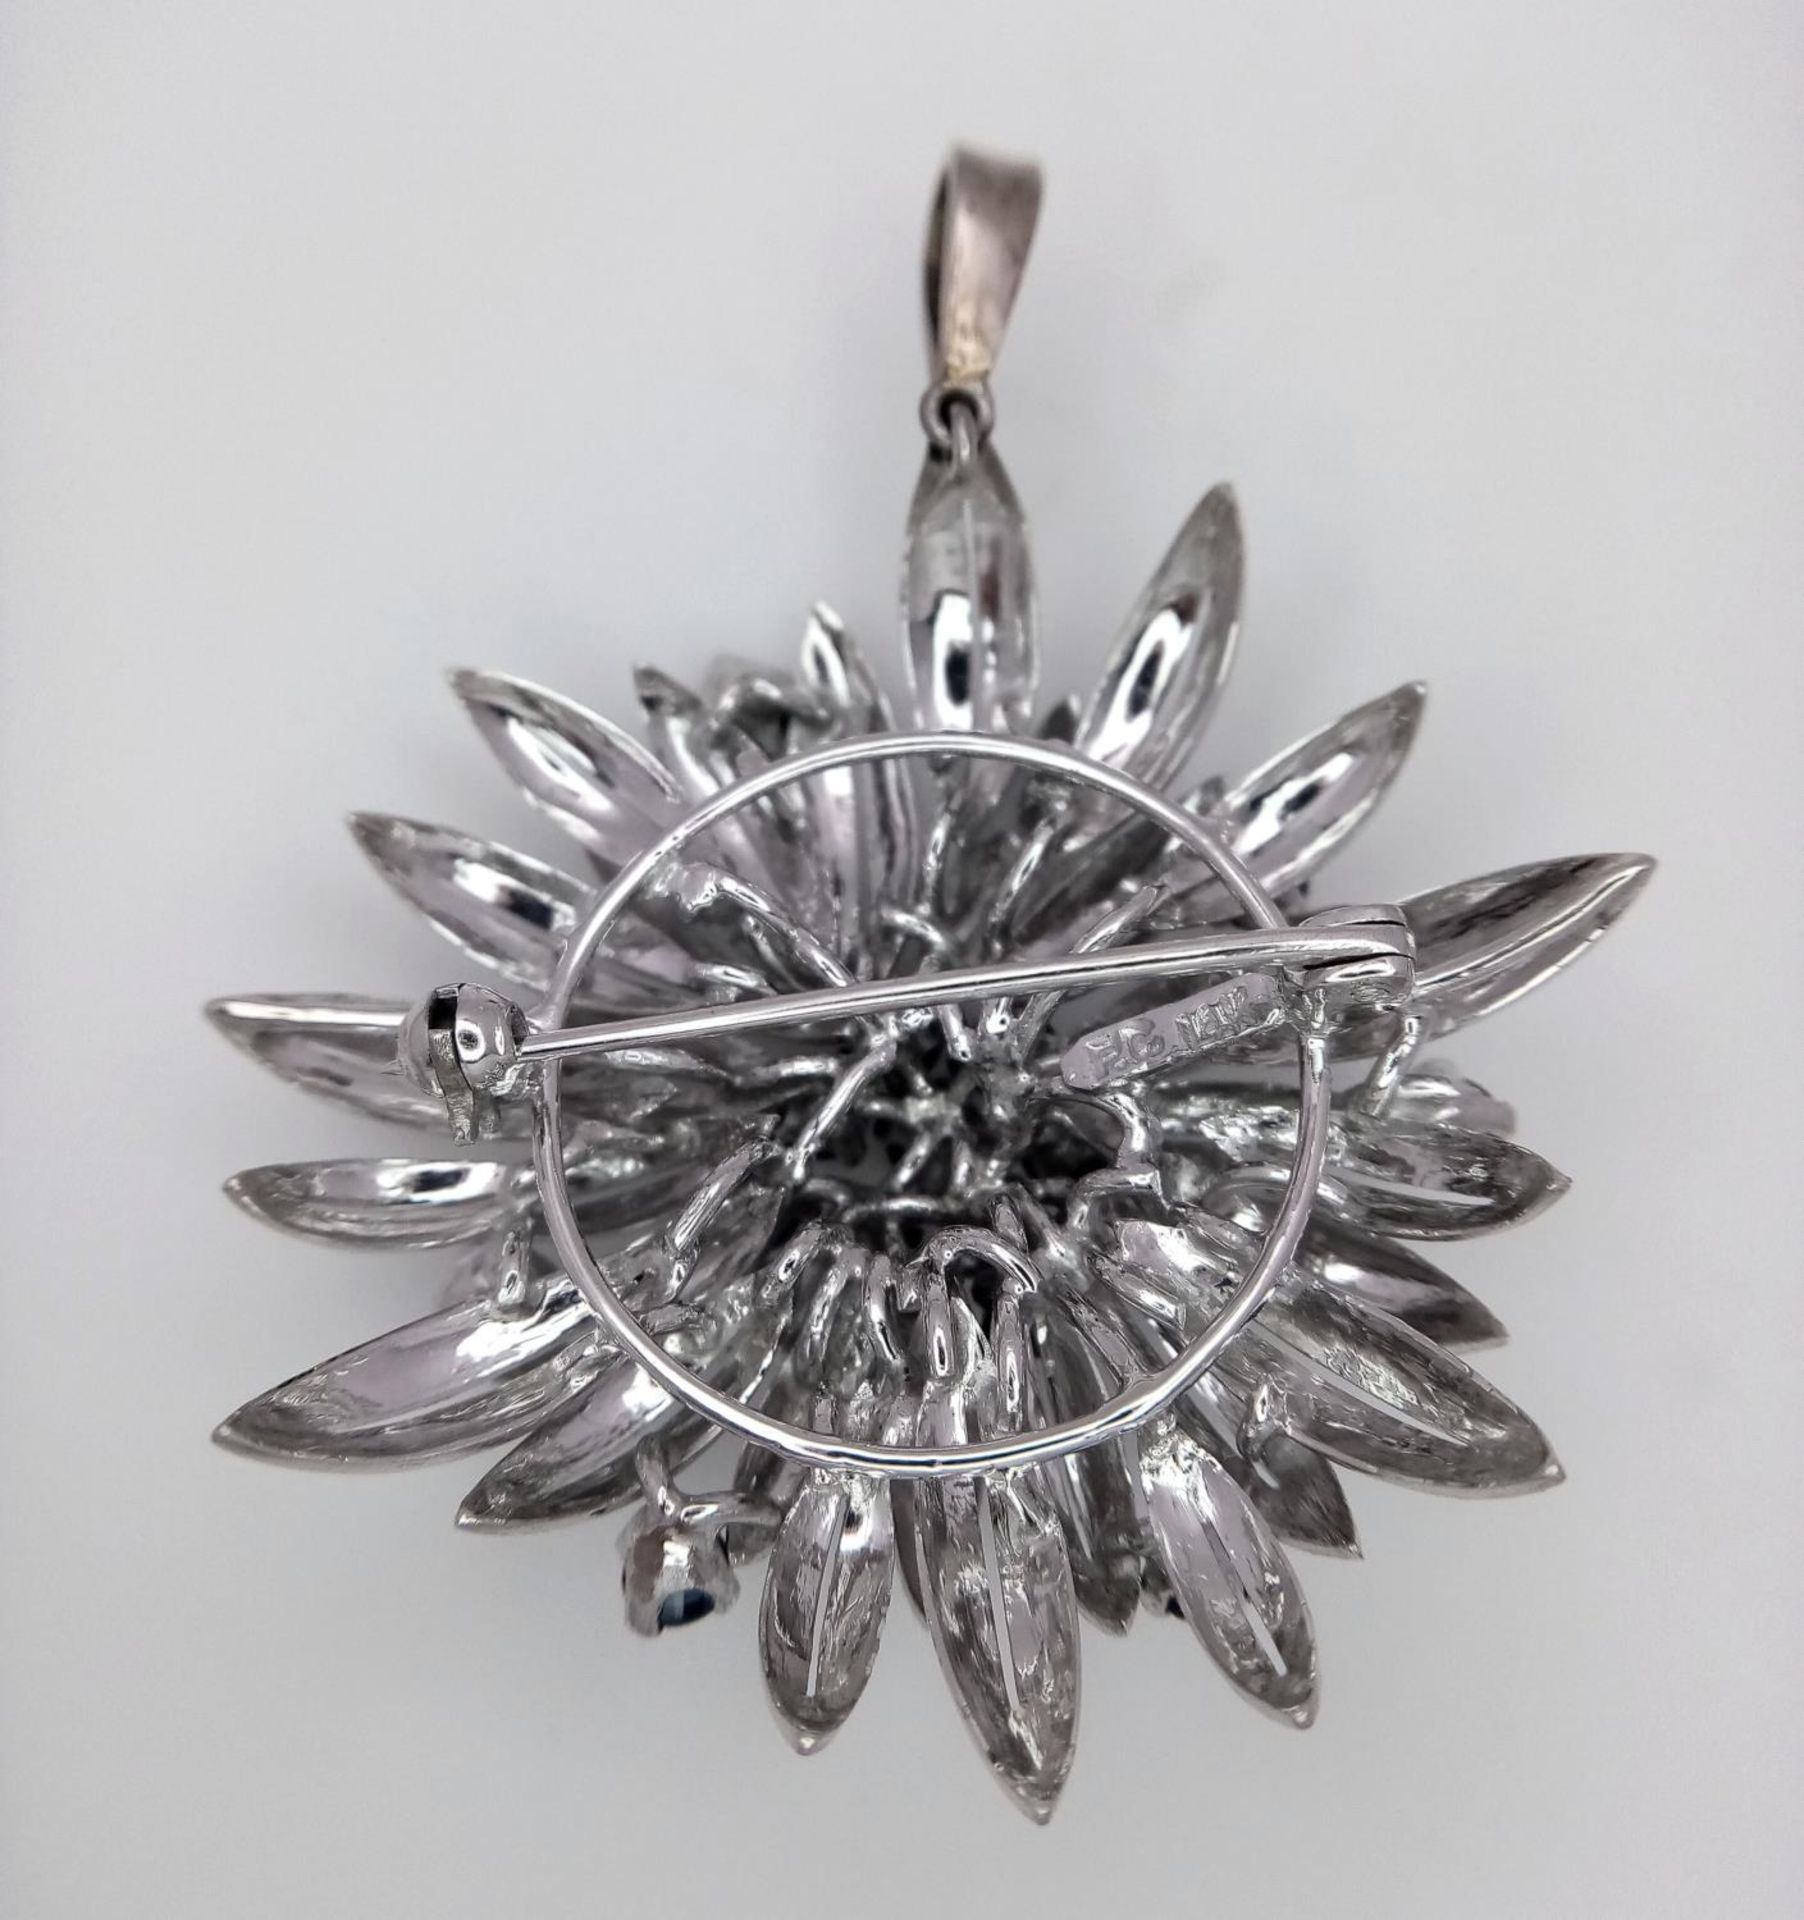 A 14ct white gold (tested as) sapphire flower brooch that has a bail that can be worn as a - Image 3 of 5